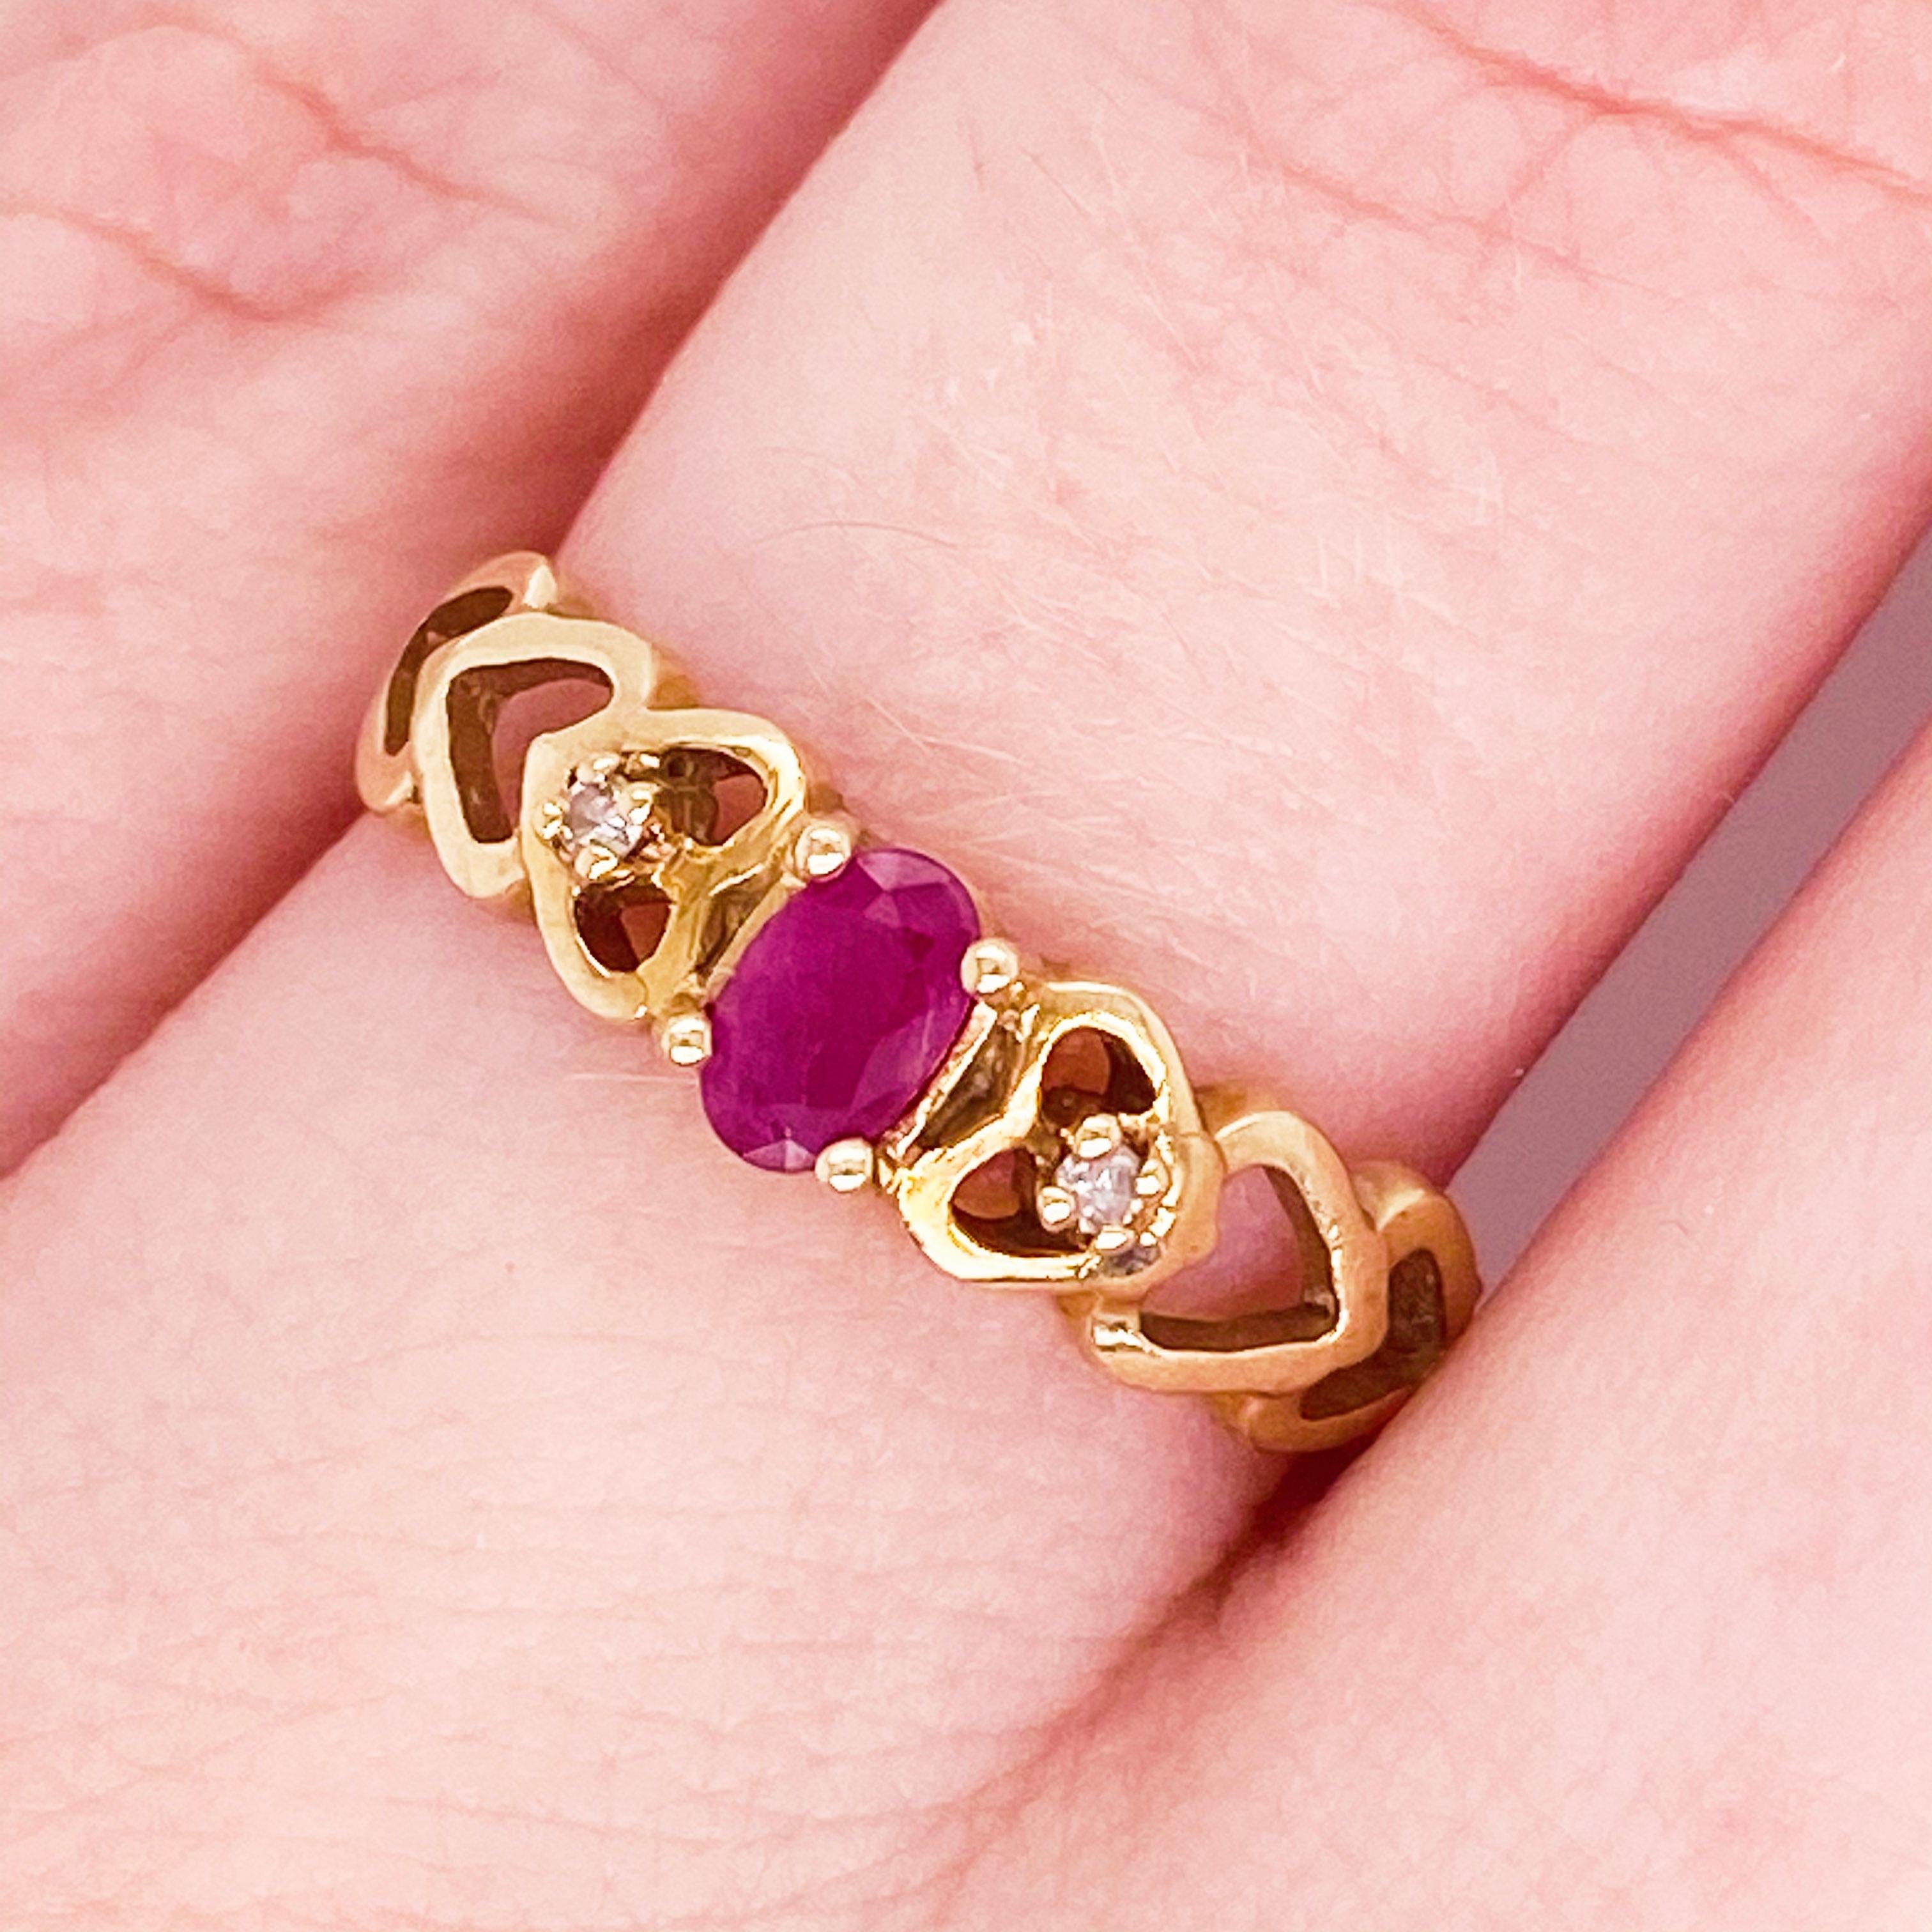 This ruby will melt any girls' heart!  It sparkles and shines and has two round diamonds that flow well with the heart design! The 14 karat yellow gold metal is like a rich, buttery color. This ring would make the perfect Valentine's Day